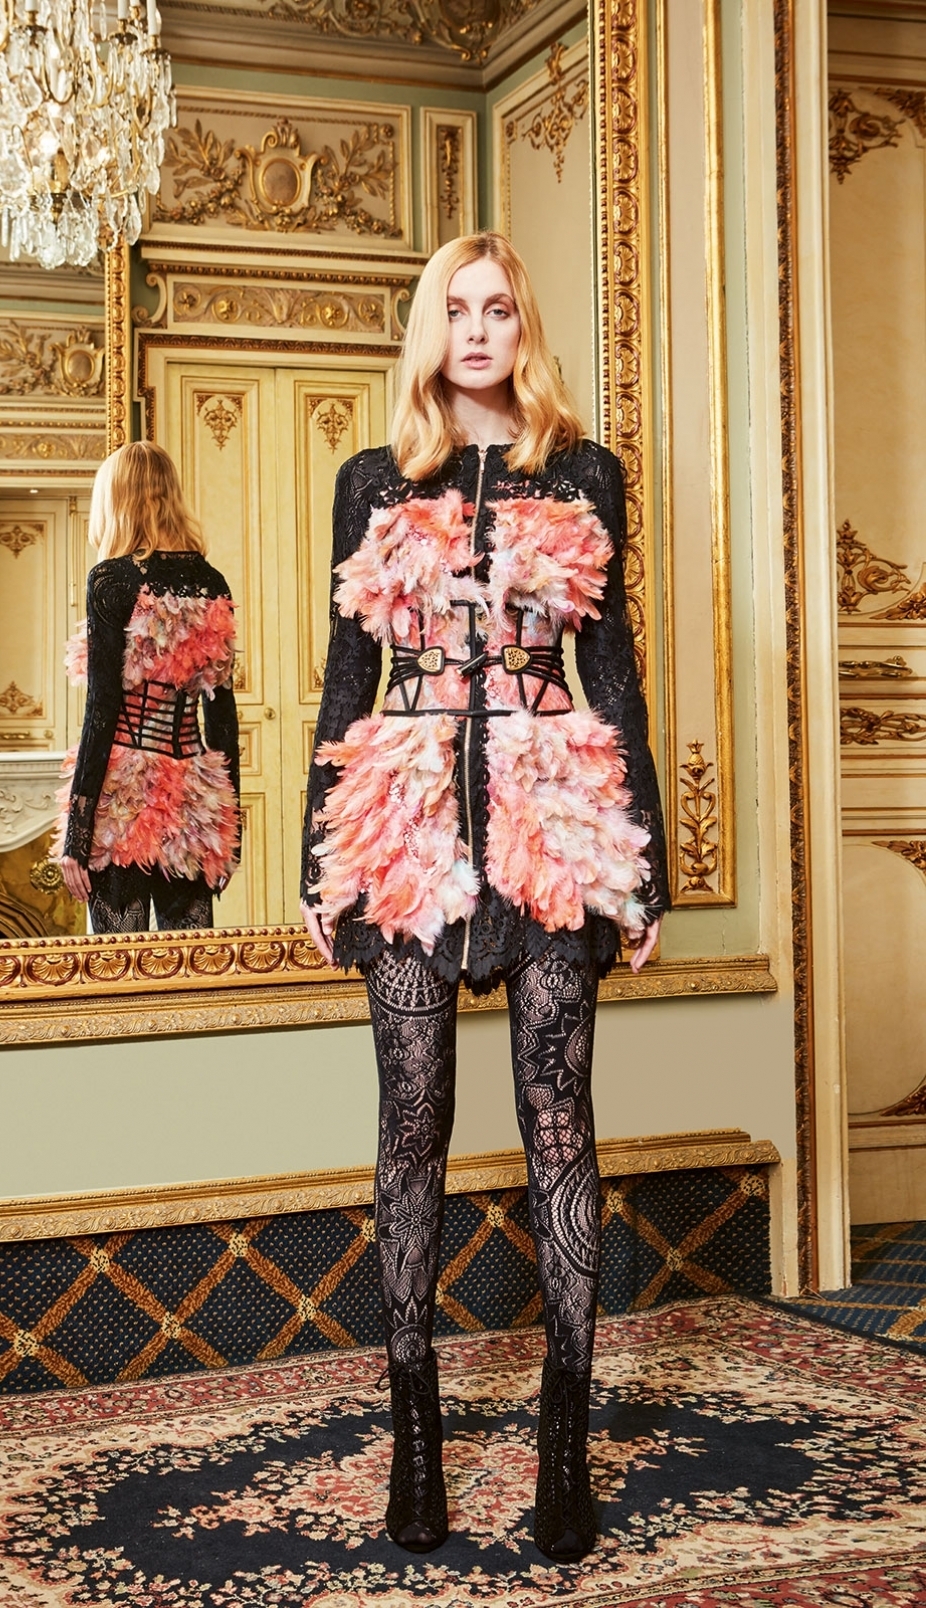 Couture coat made of pink, salmon and white natural feathers over black guipure